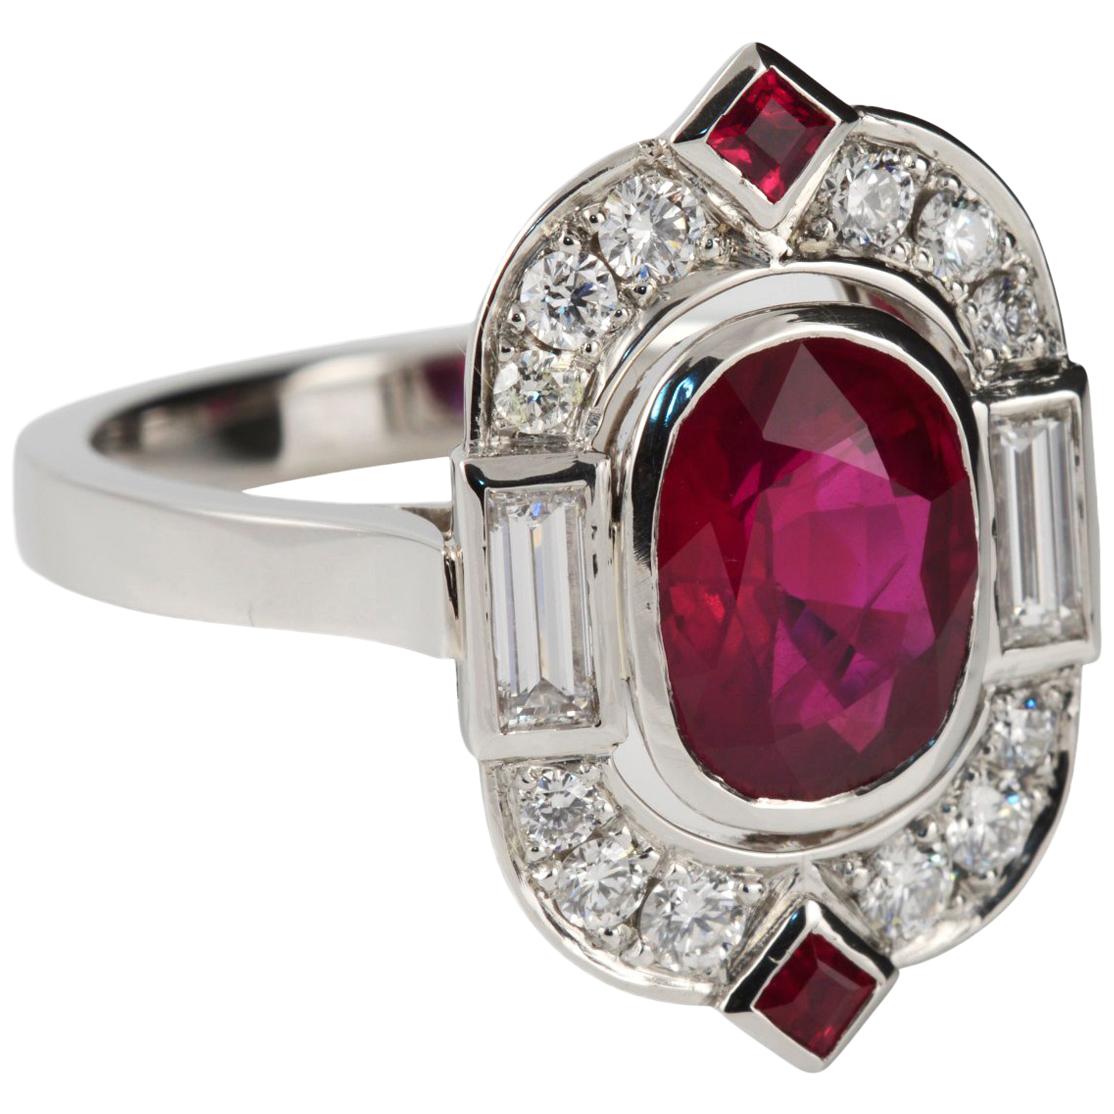 3.02 Carat Burmese Ruby and Diamond Art Deco Tablet Ring in 18 Karat White Gold For Sale